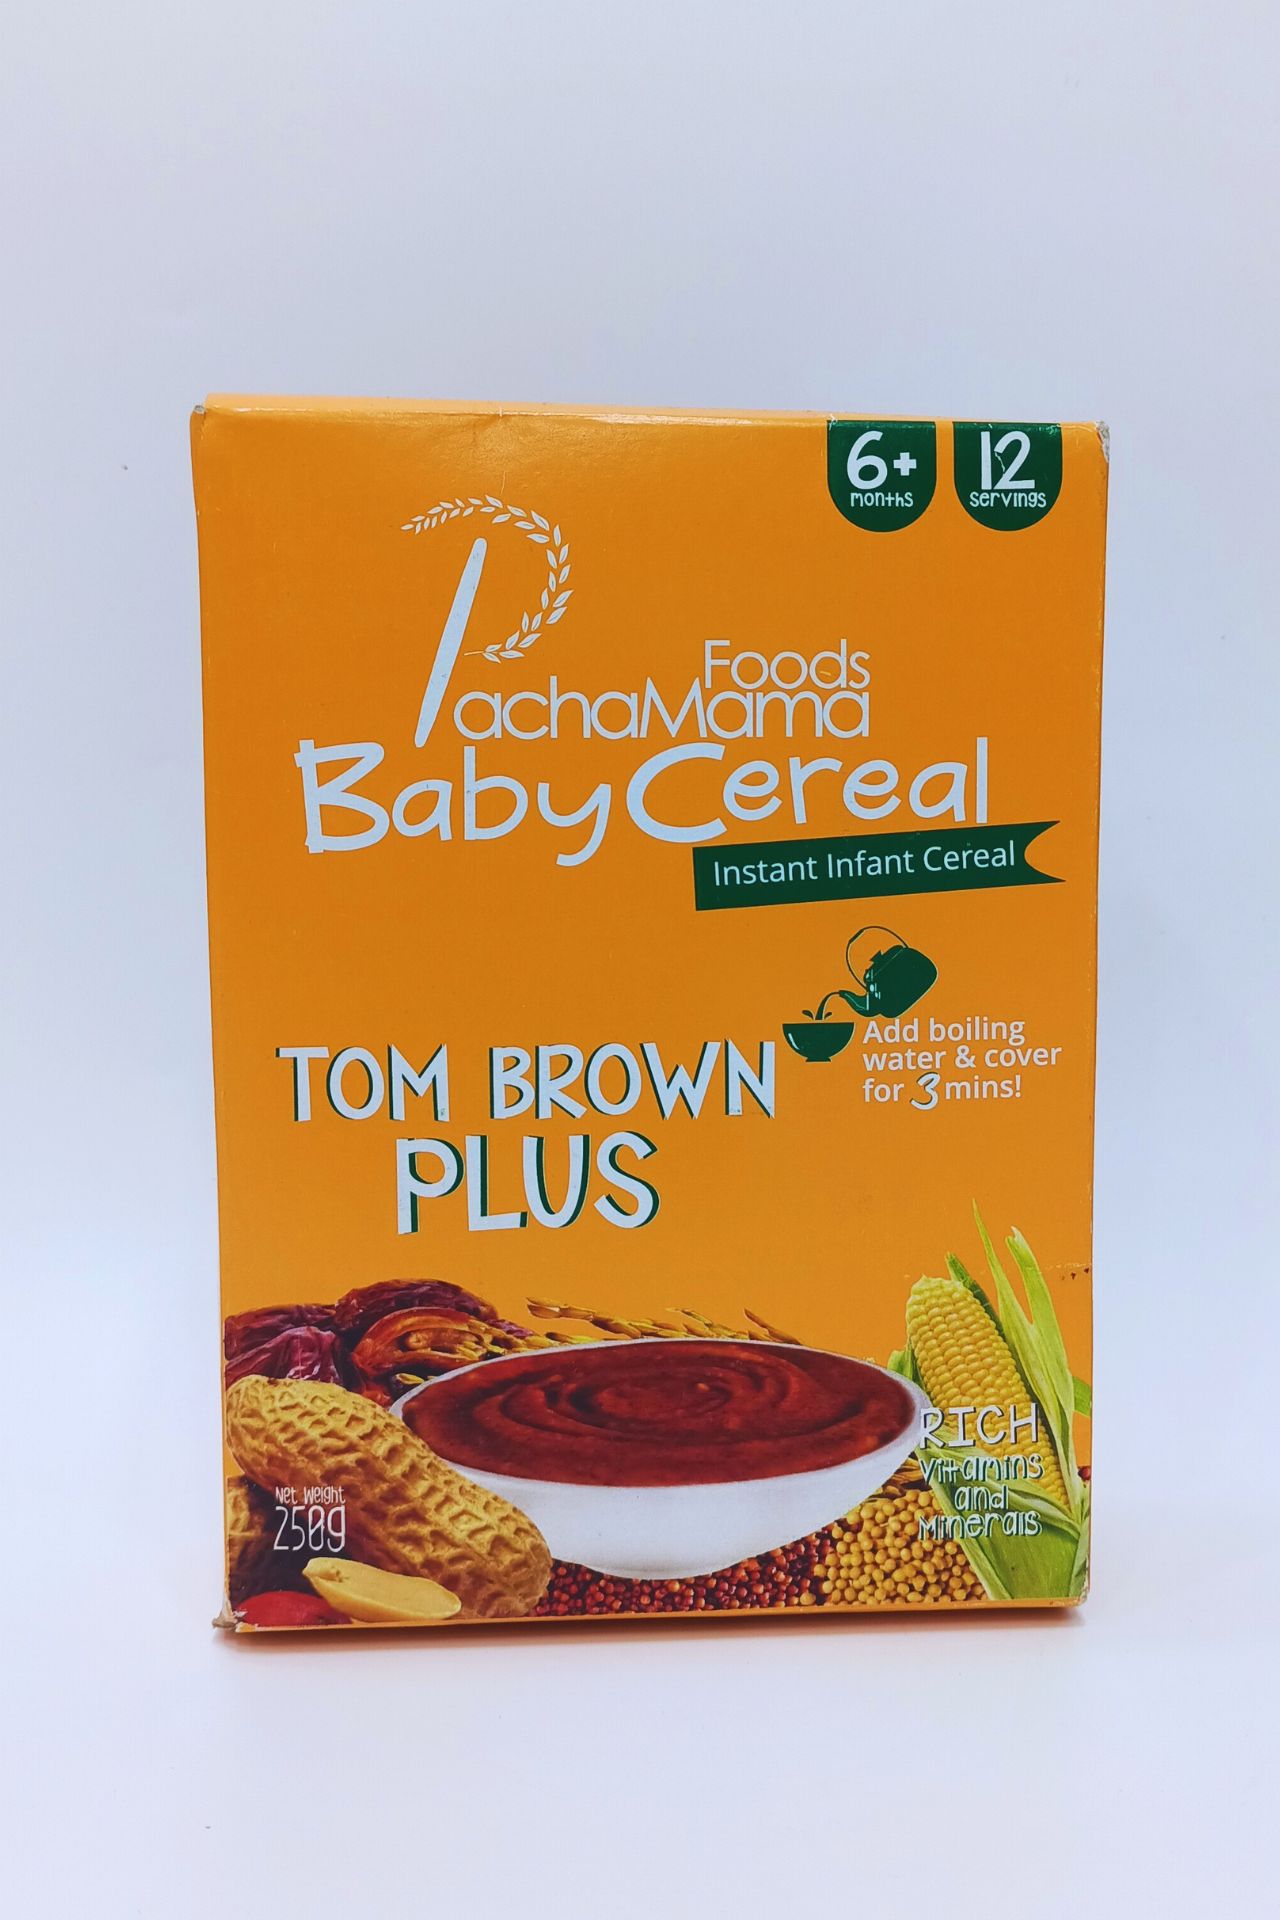 Pachamama baby Cereal - Tom brown plus